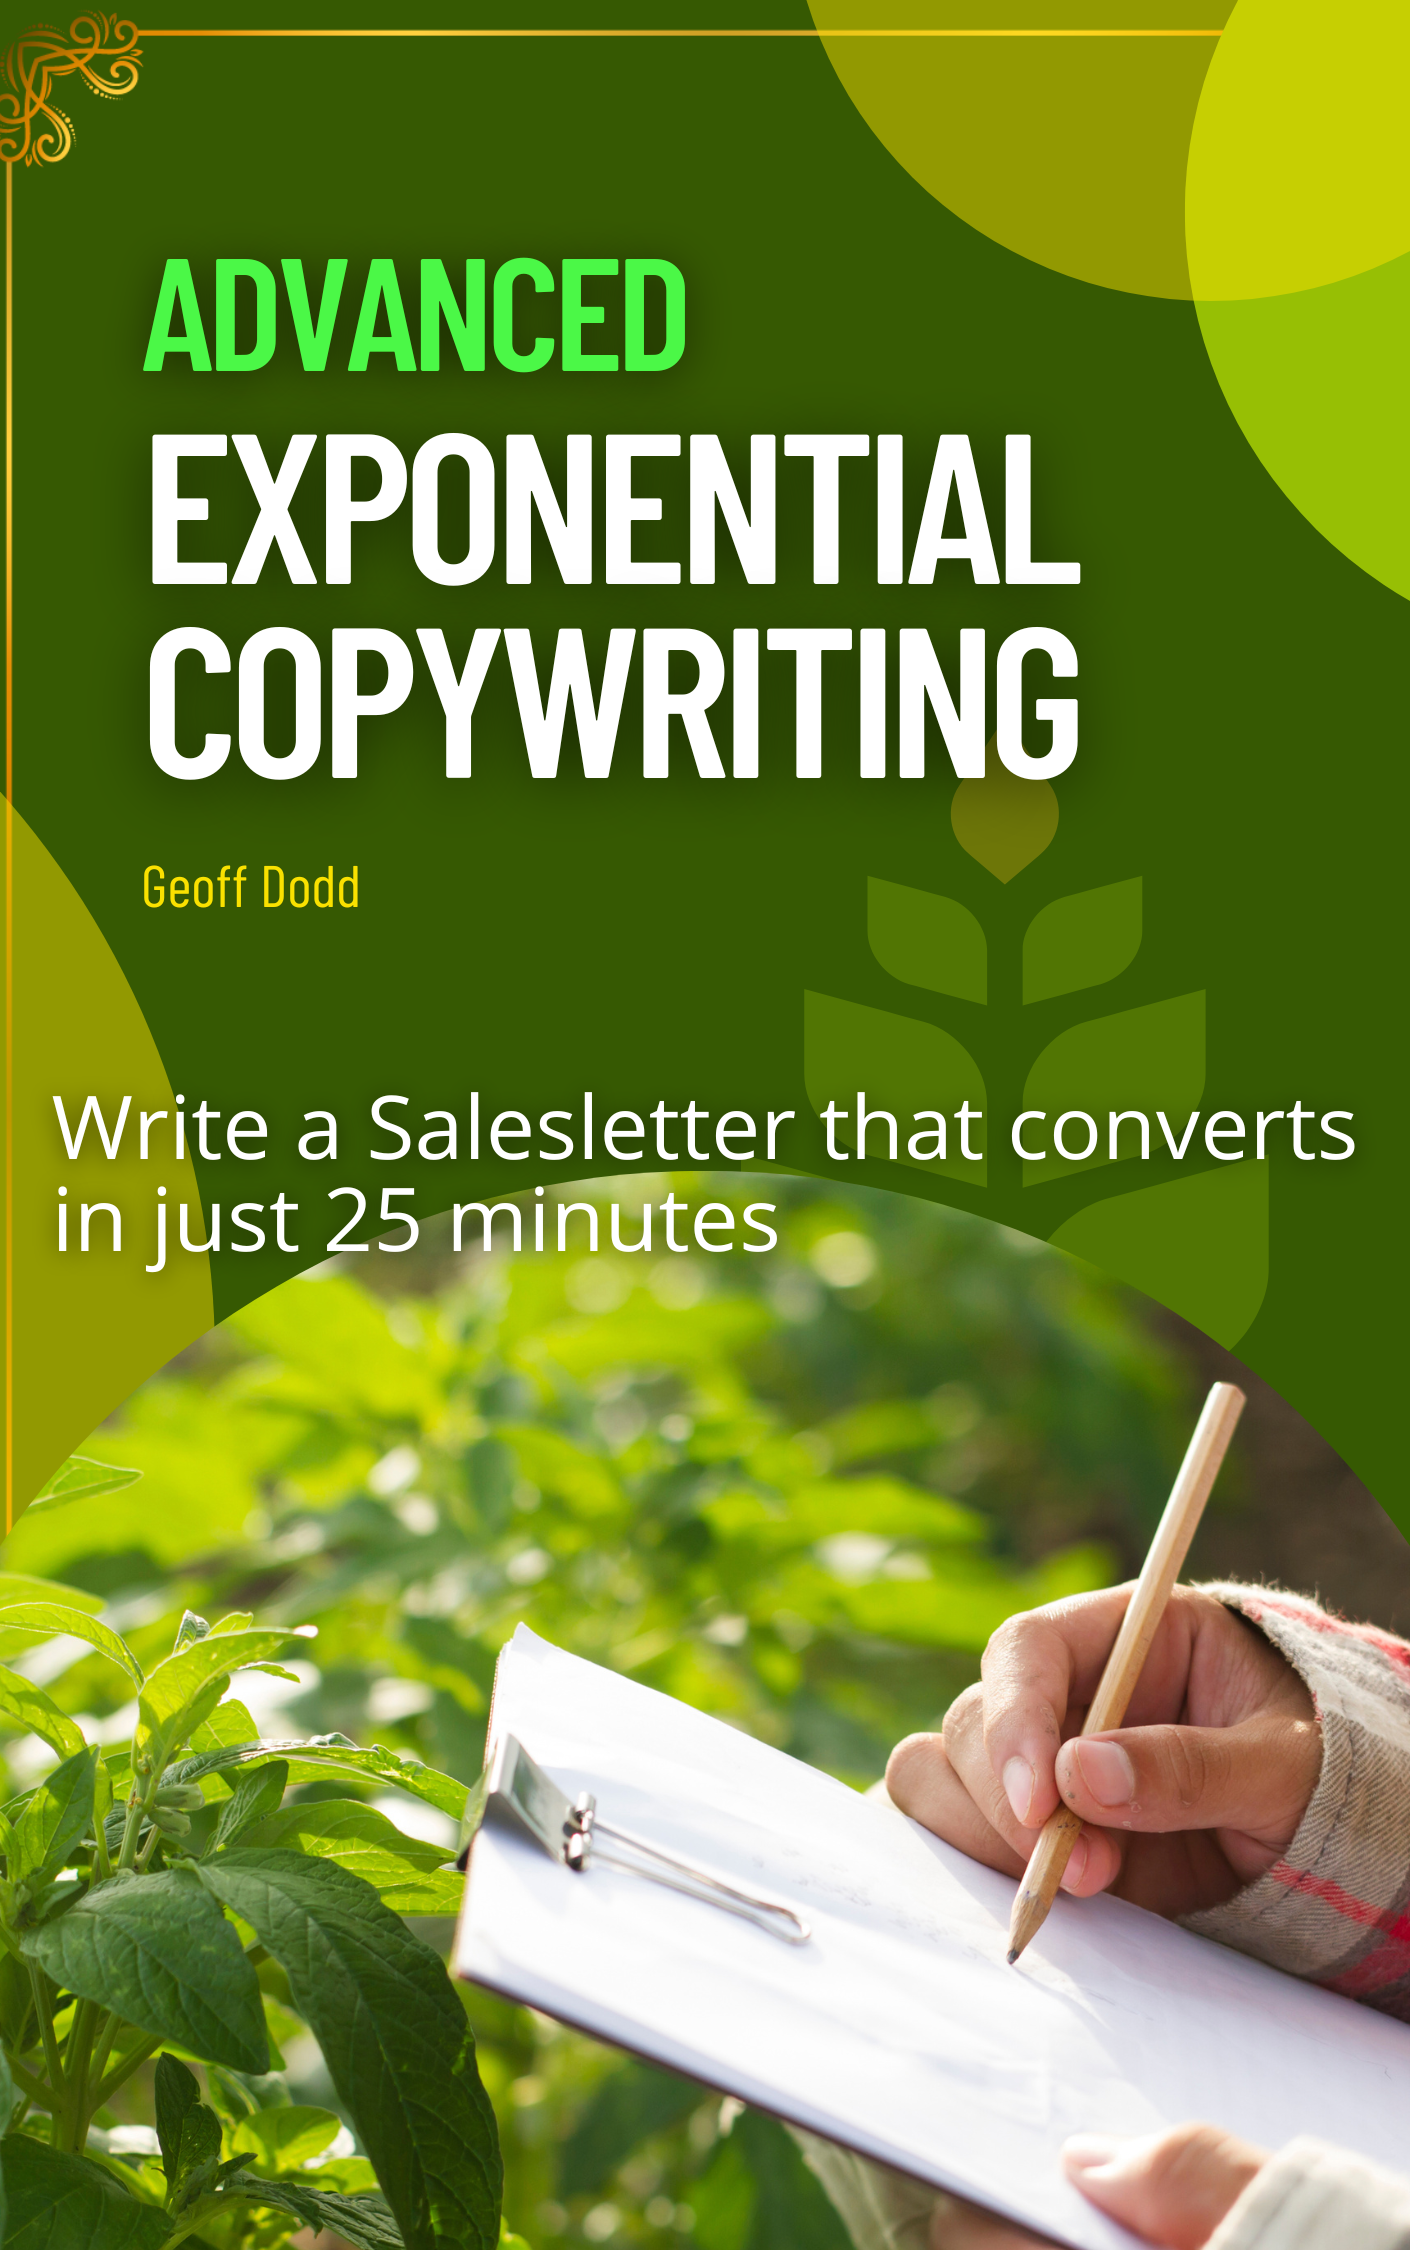 Download Exponential Copywriting e-Book by Geoff Dodd for trigger words copy to get the sale